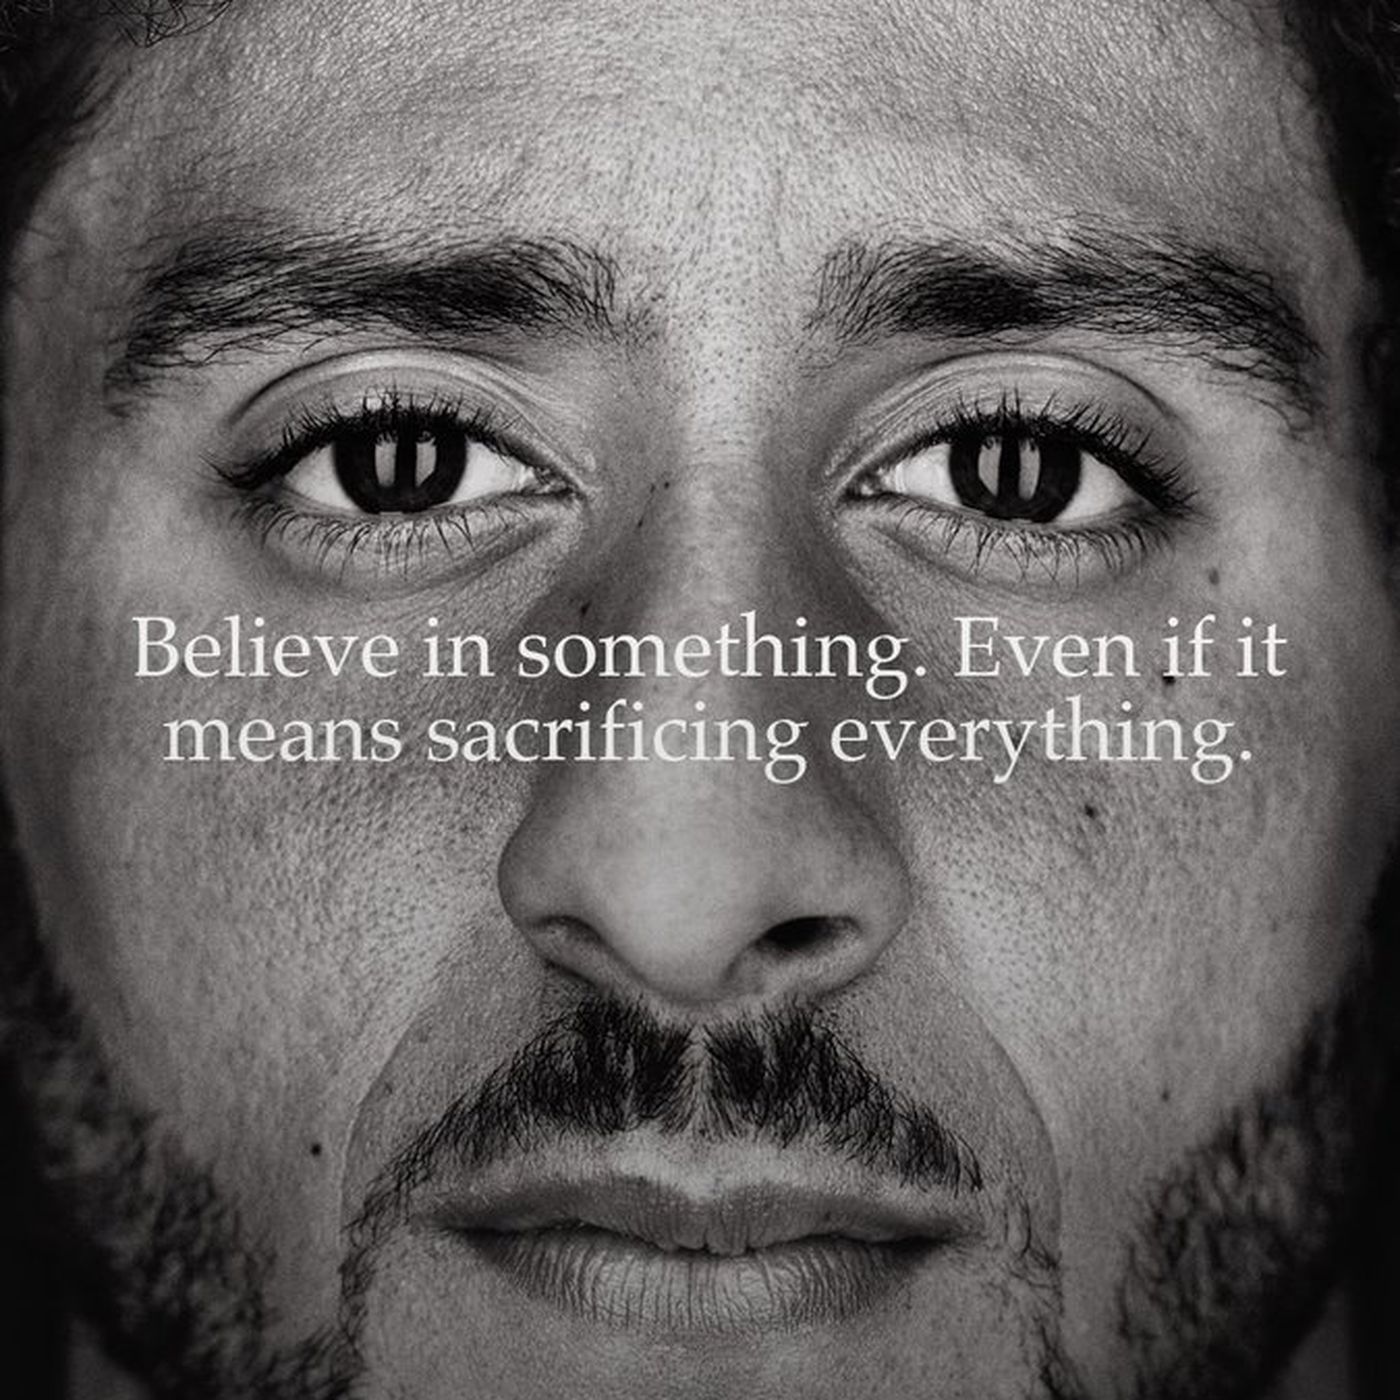 Colin Kaepernick featured in one of Nike’s Just Do It campaign promos.